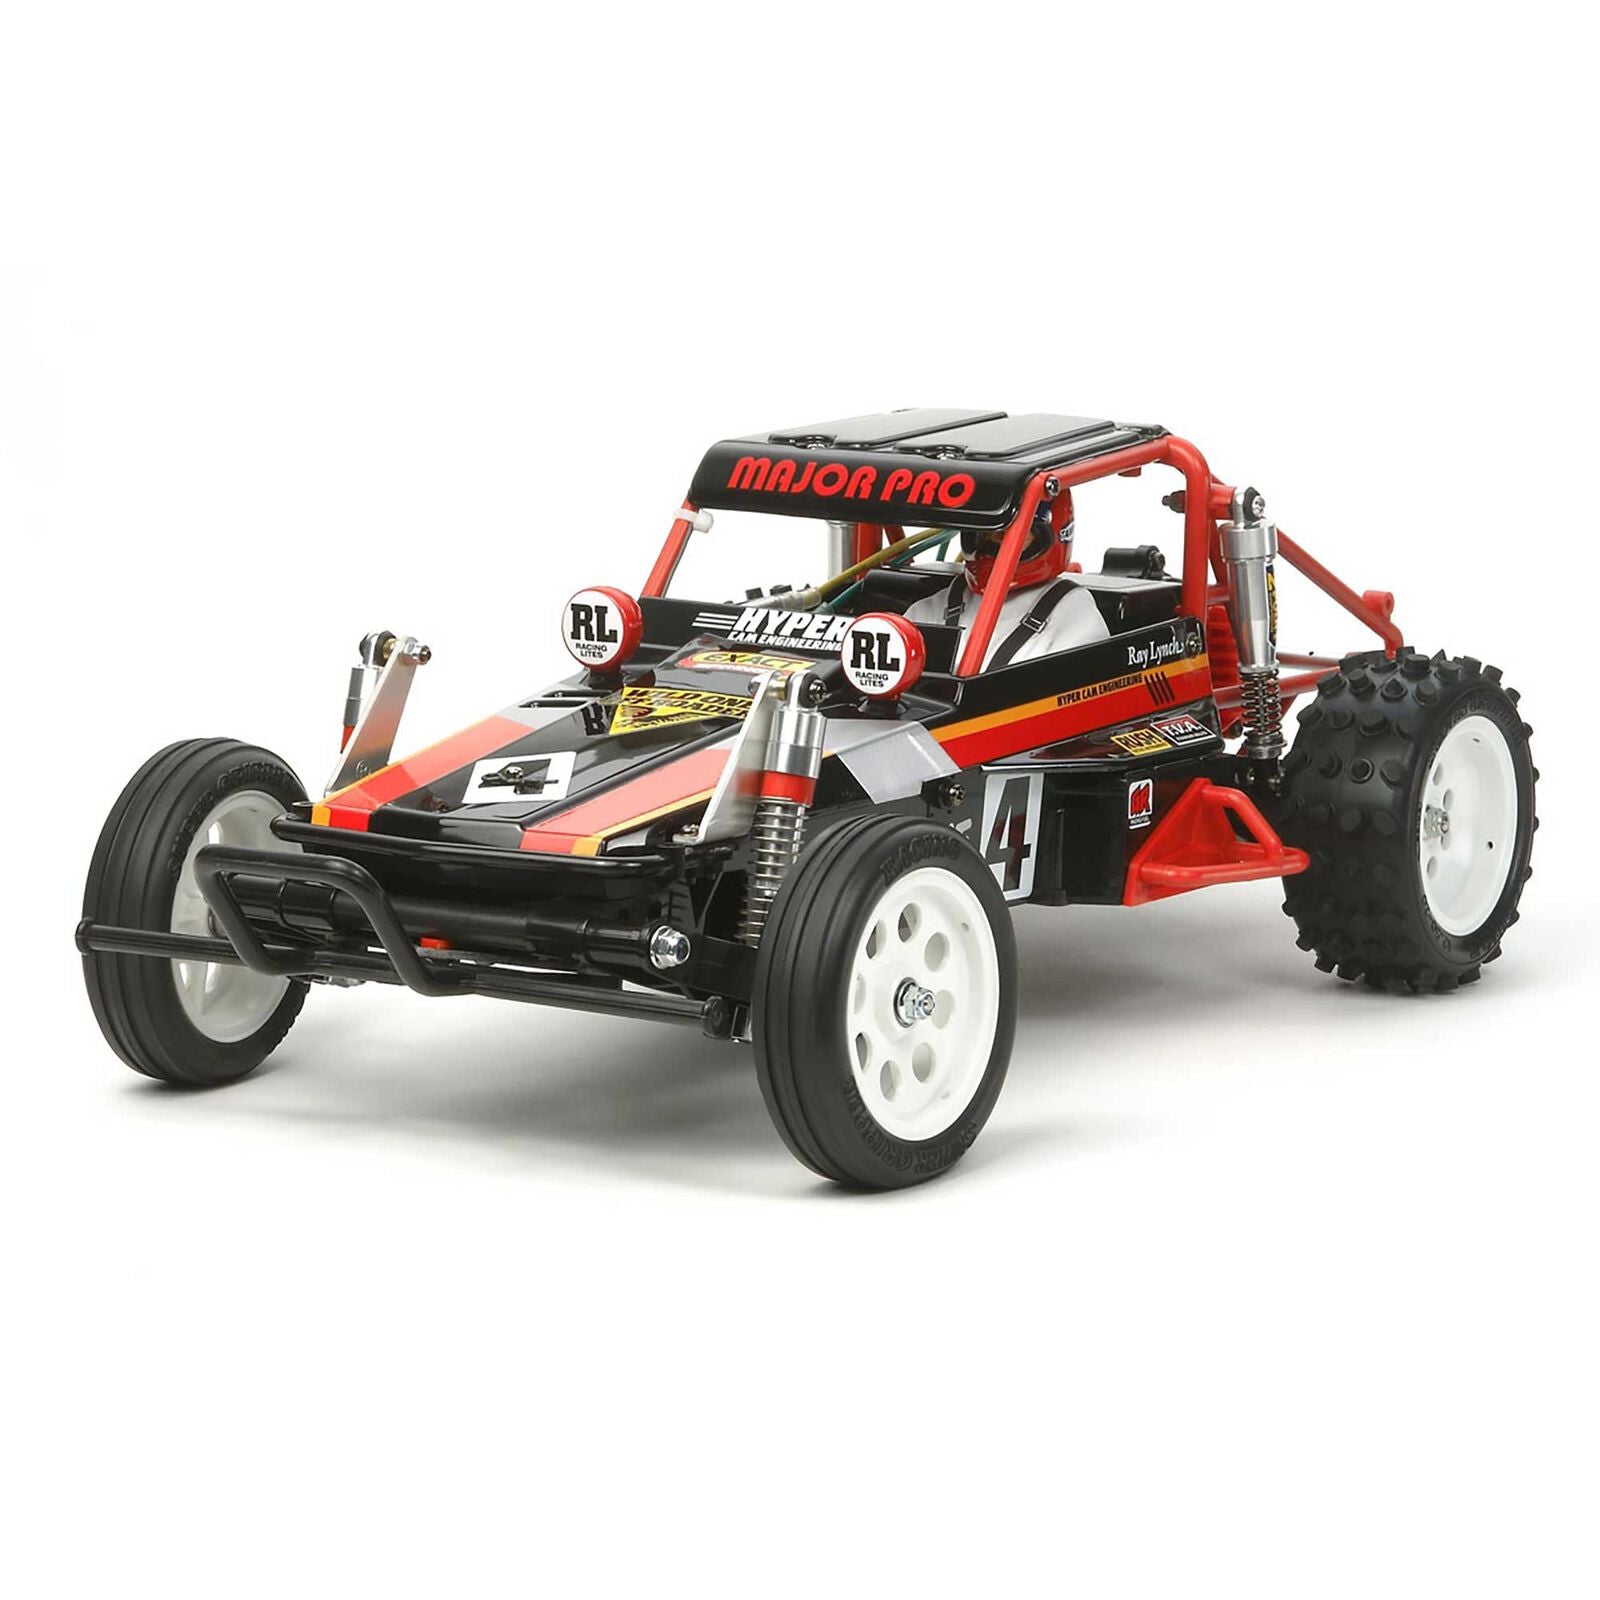 TAMIYA 58525-60A 1/10 Wild One 2WD Off-Road Buggy Kit, Red